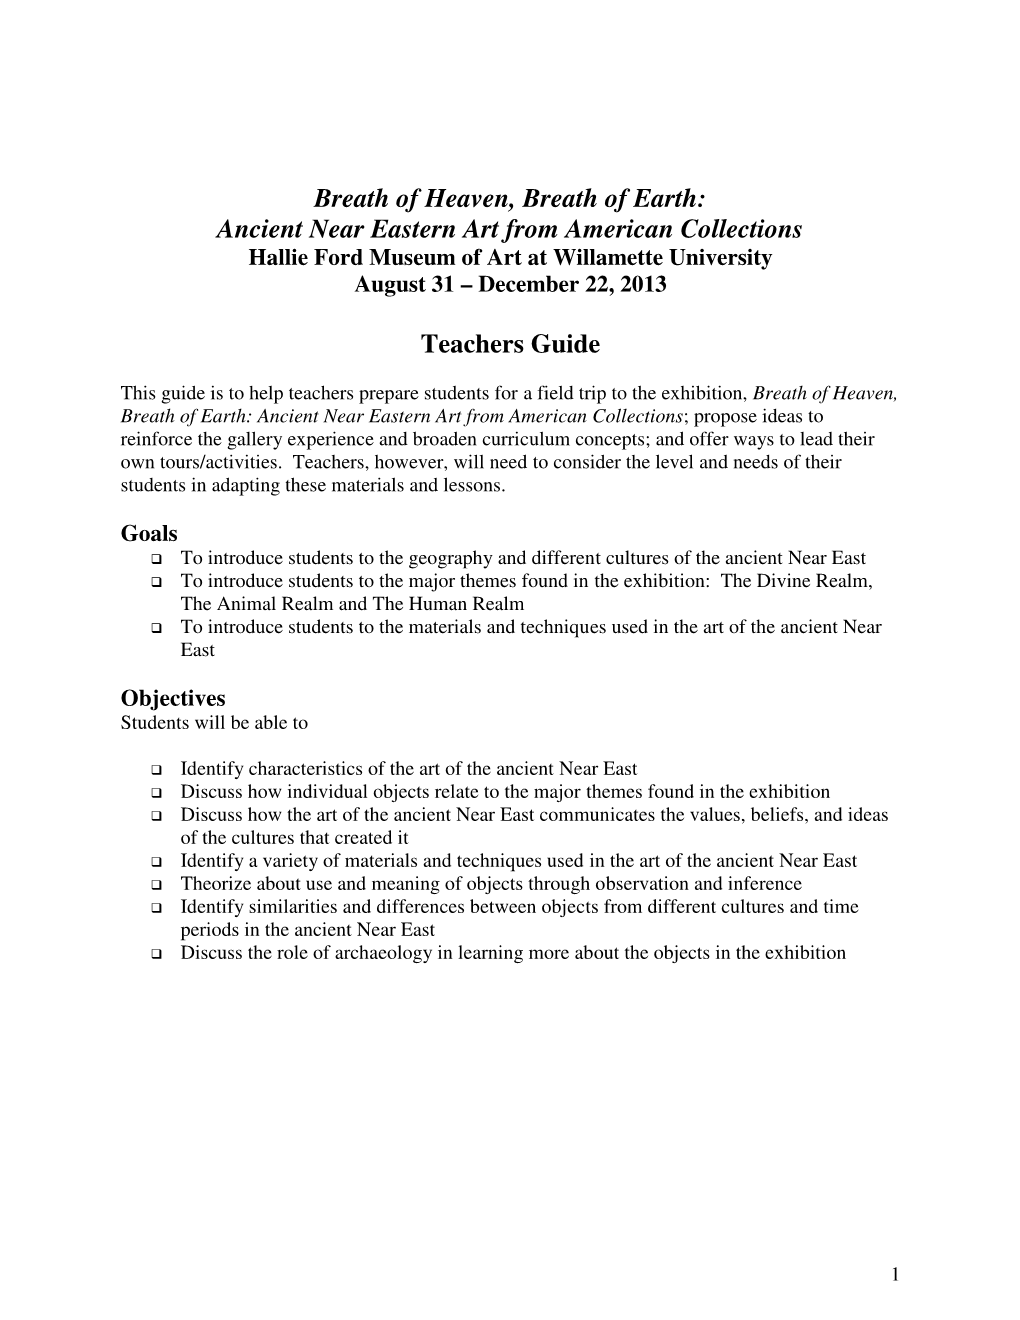 Breath of Heaven, Breath of Earth: Ancient Near Eastern Art from American Collections Teachers Guide